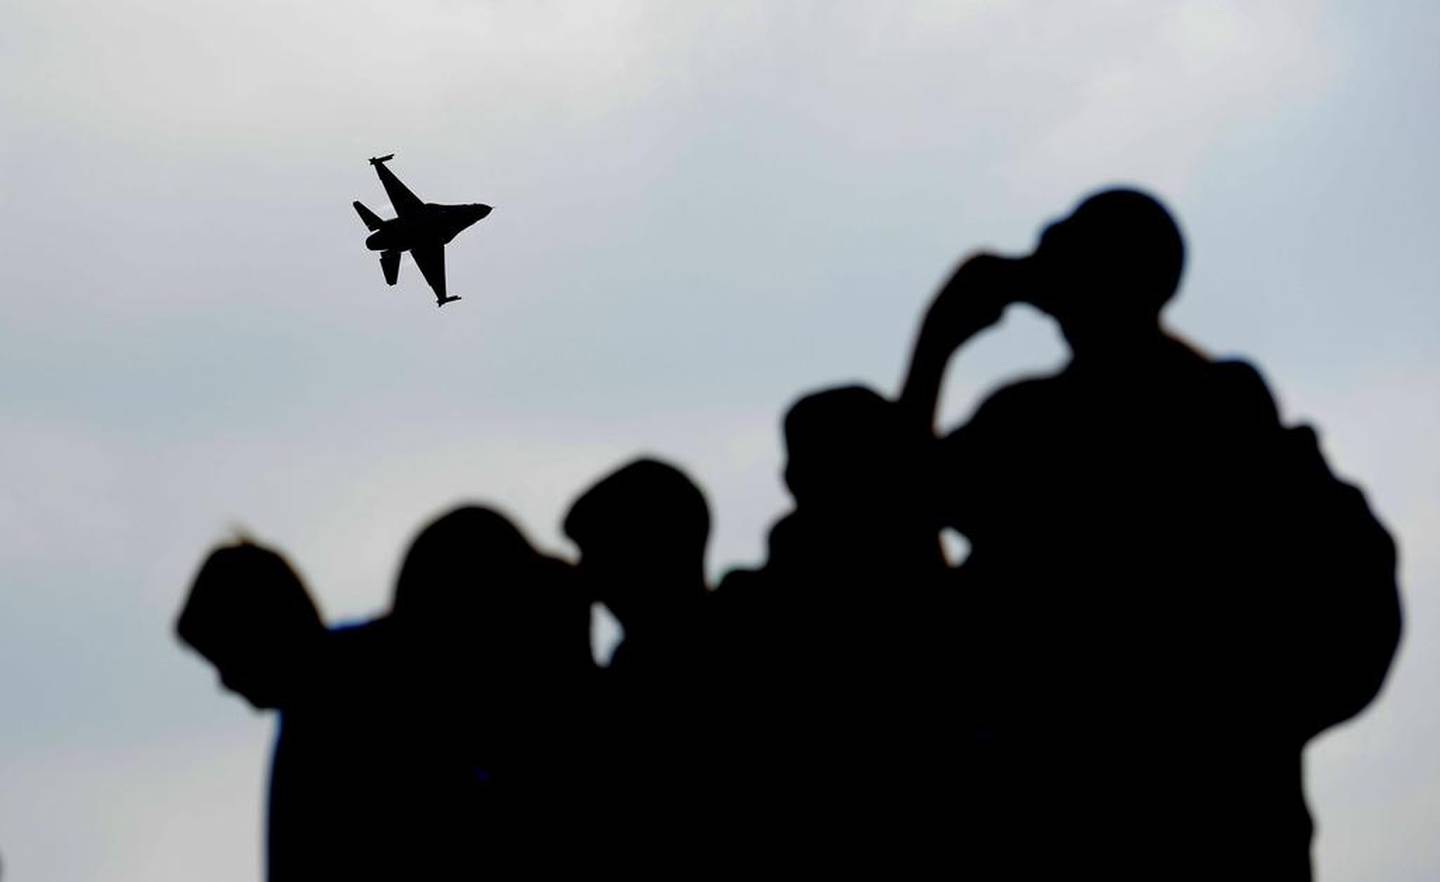 Spectators watch a MiG-29 jet fighter aircraft carrying out a demonstration during Nato Days in Ostrava, Czech Republic. EPA